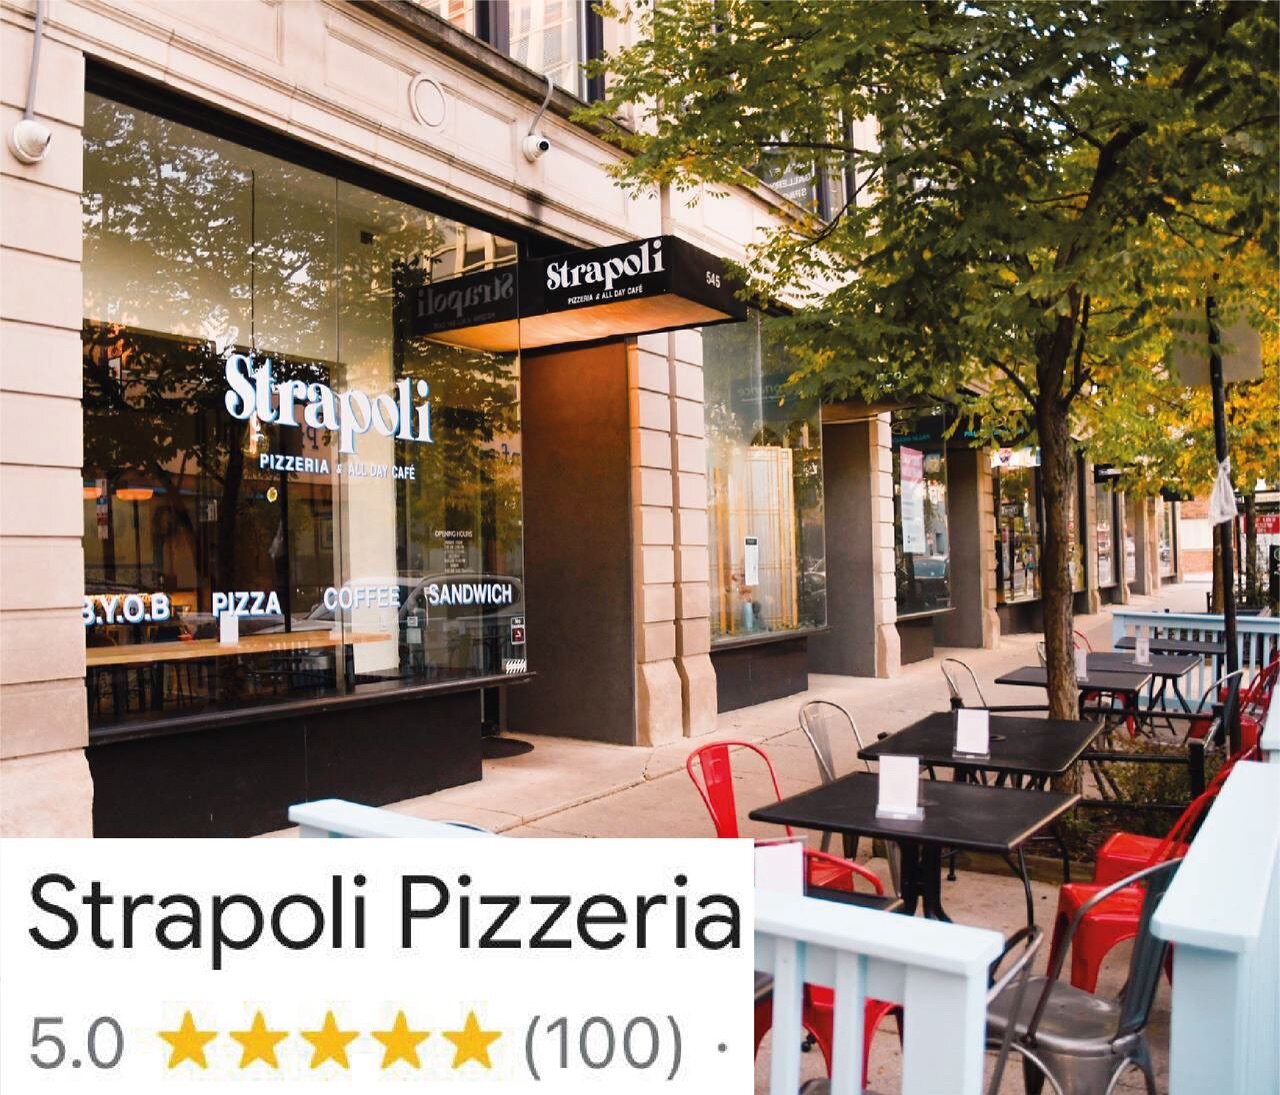 🎉 We are thrilled to have reached 100 reviews on Google and maintain our 5-star rating! 🌟 Huge thanks to Chicago for your incredible support! 🙏 We&rsquo;ve also launched a blog on our website, and our first article is a heartfelt thank you to our 